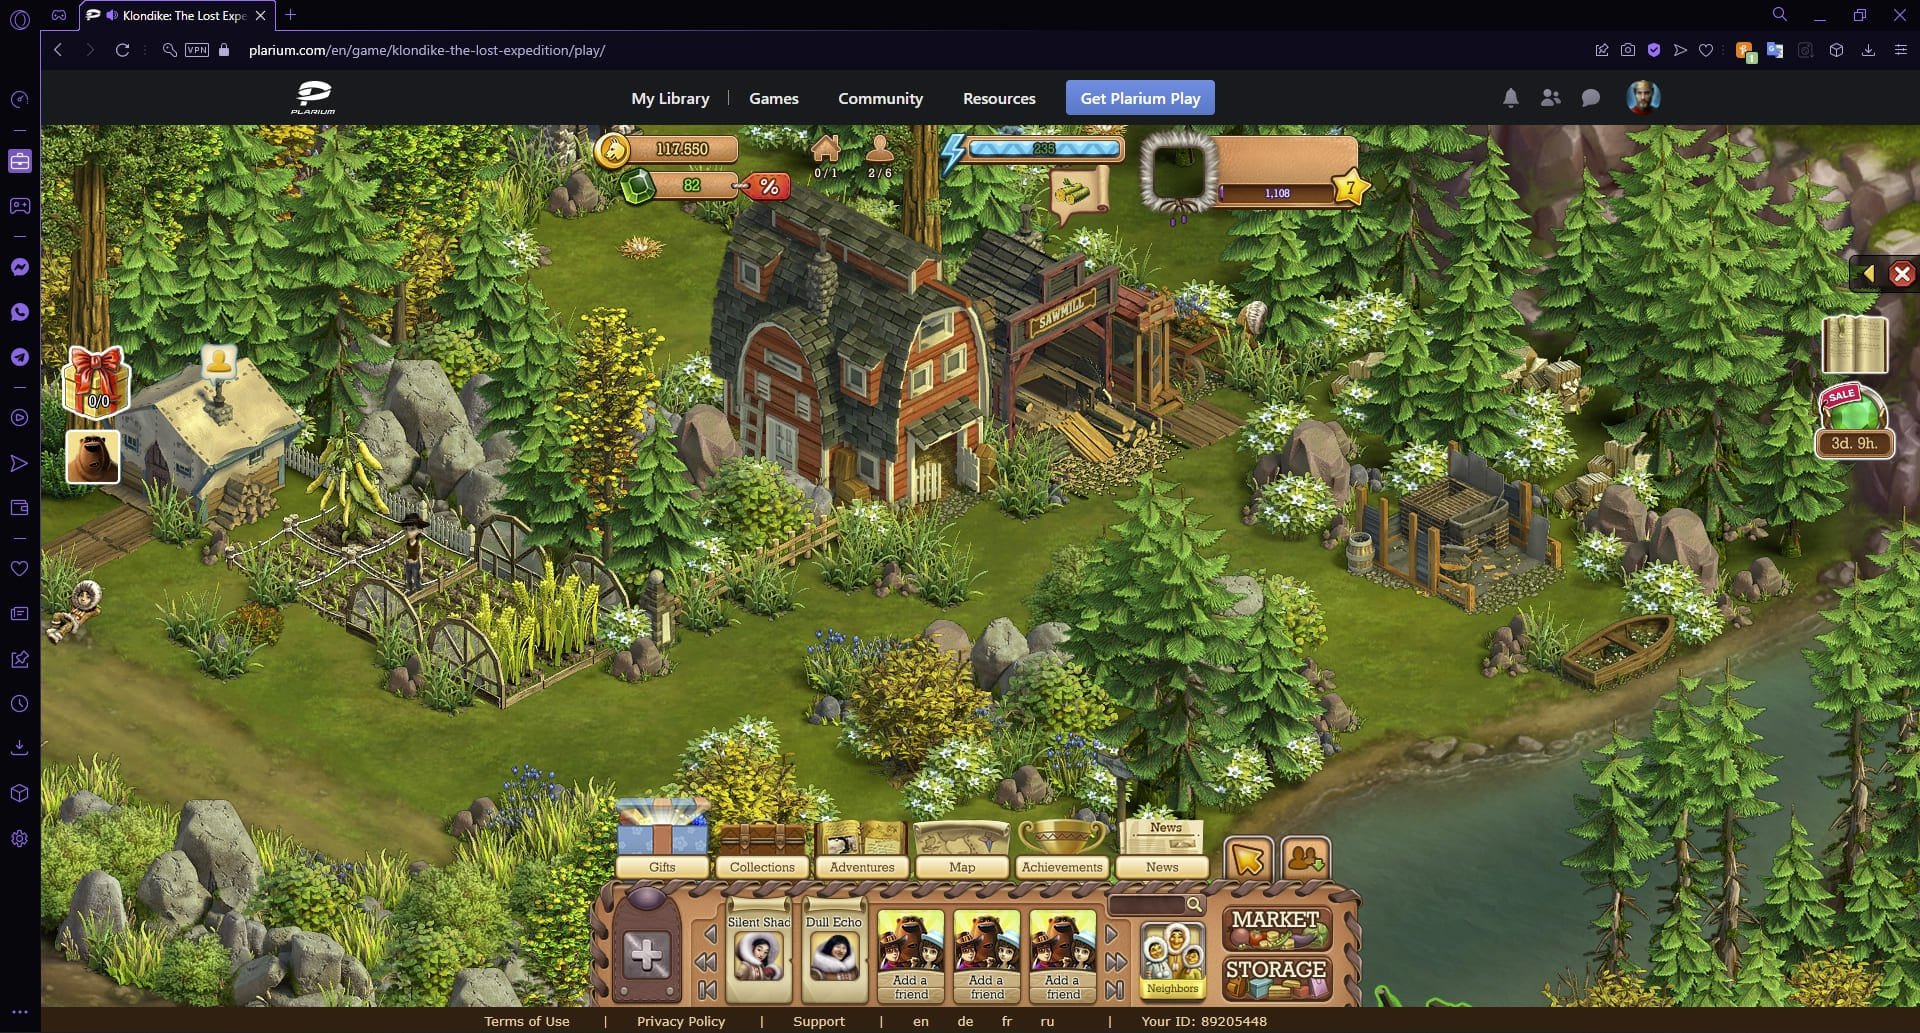 Klondike: The Lost Expedition non-flash browser game.